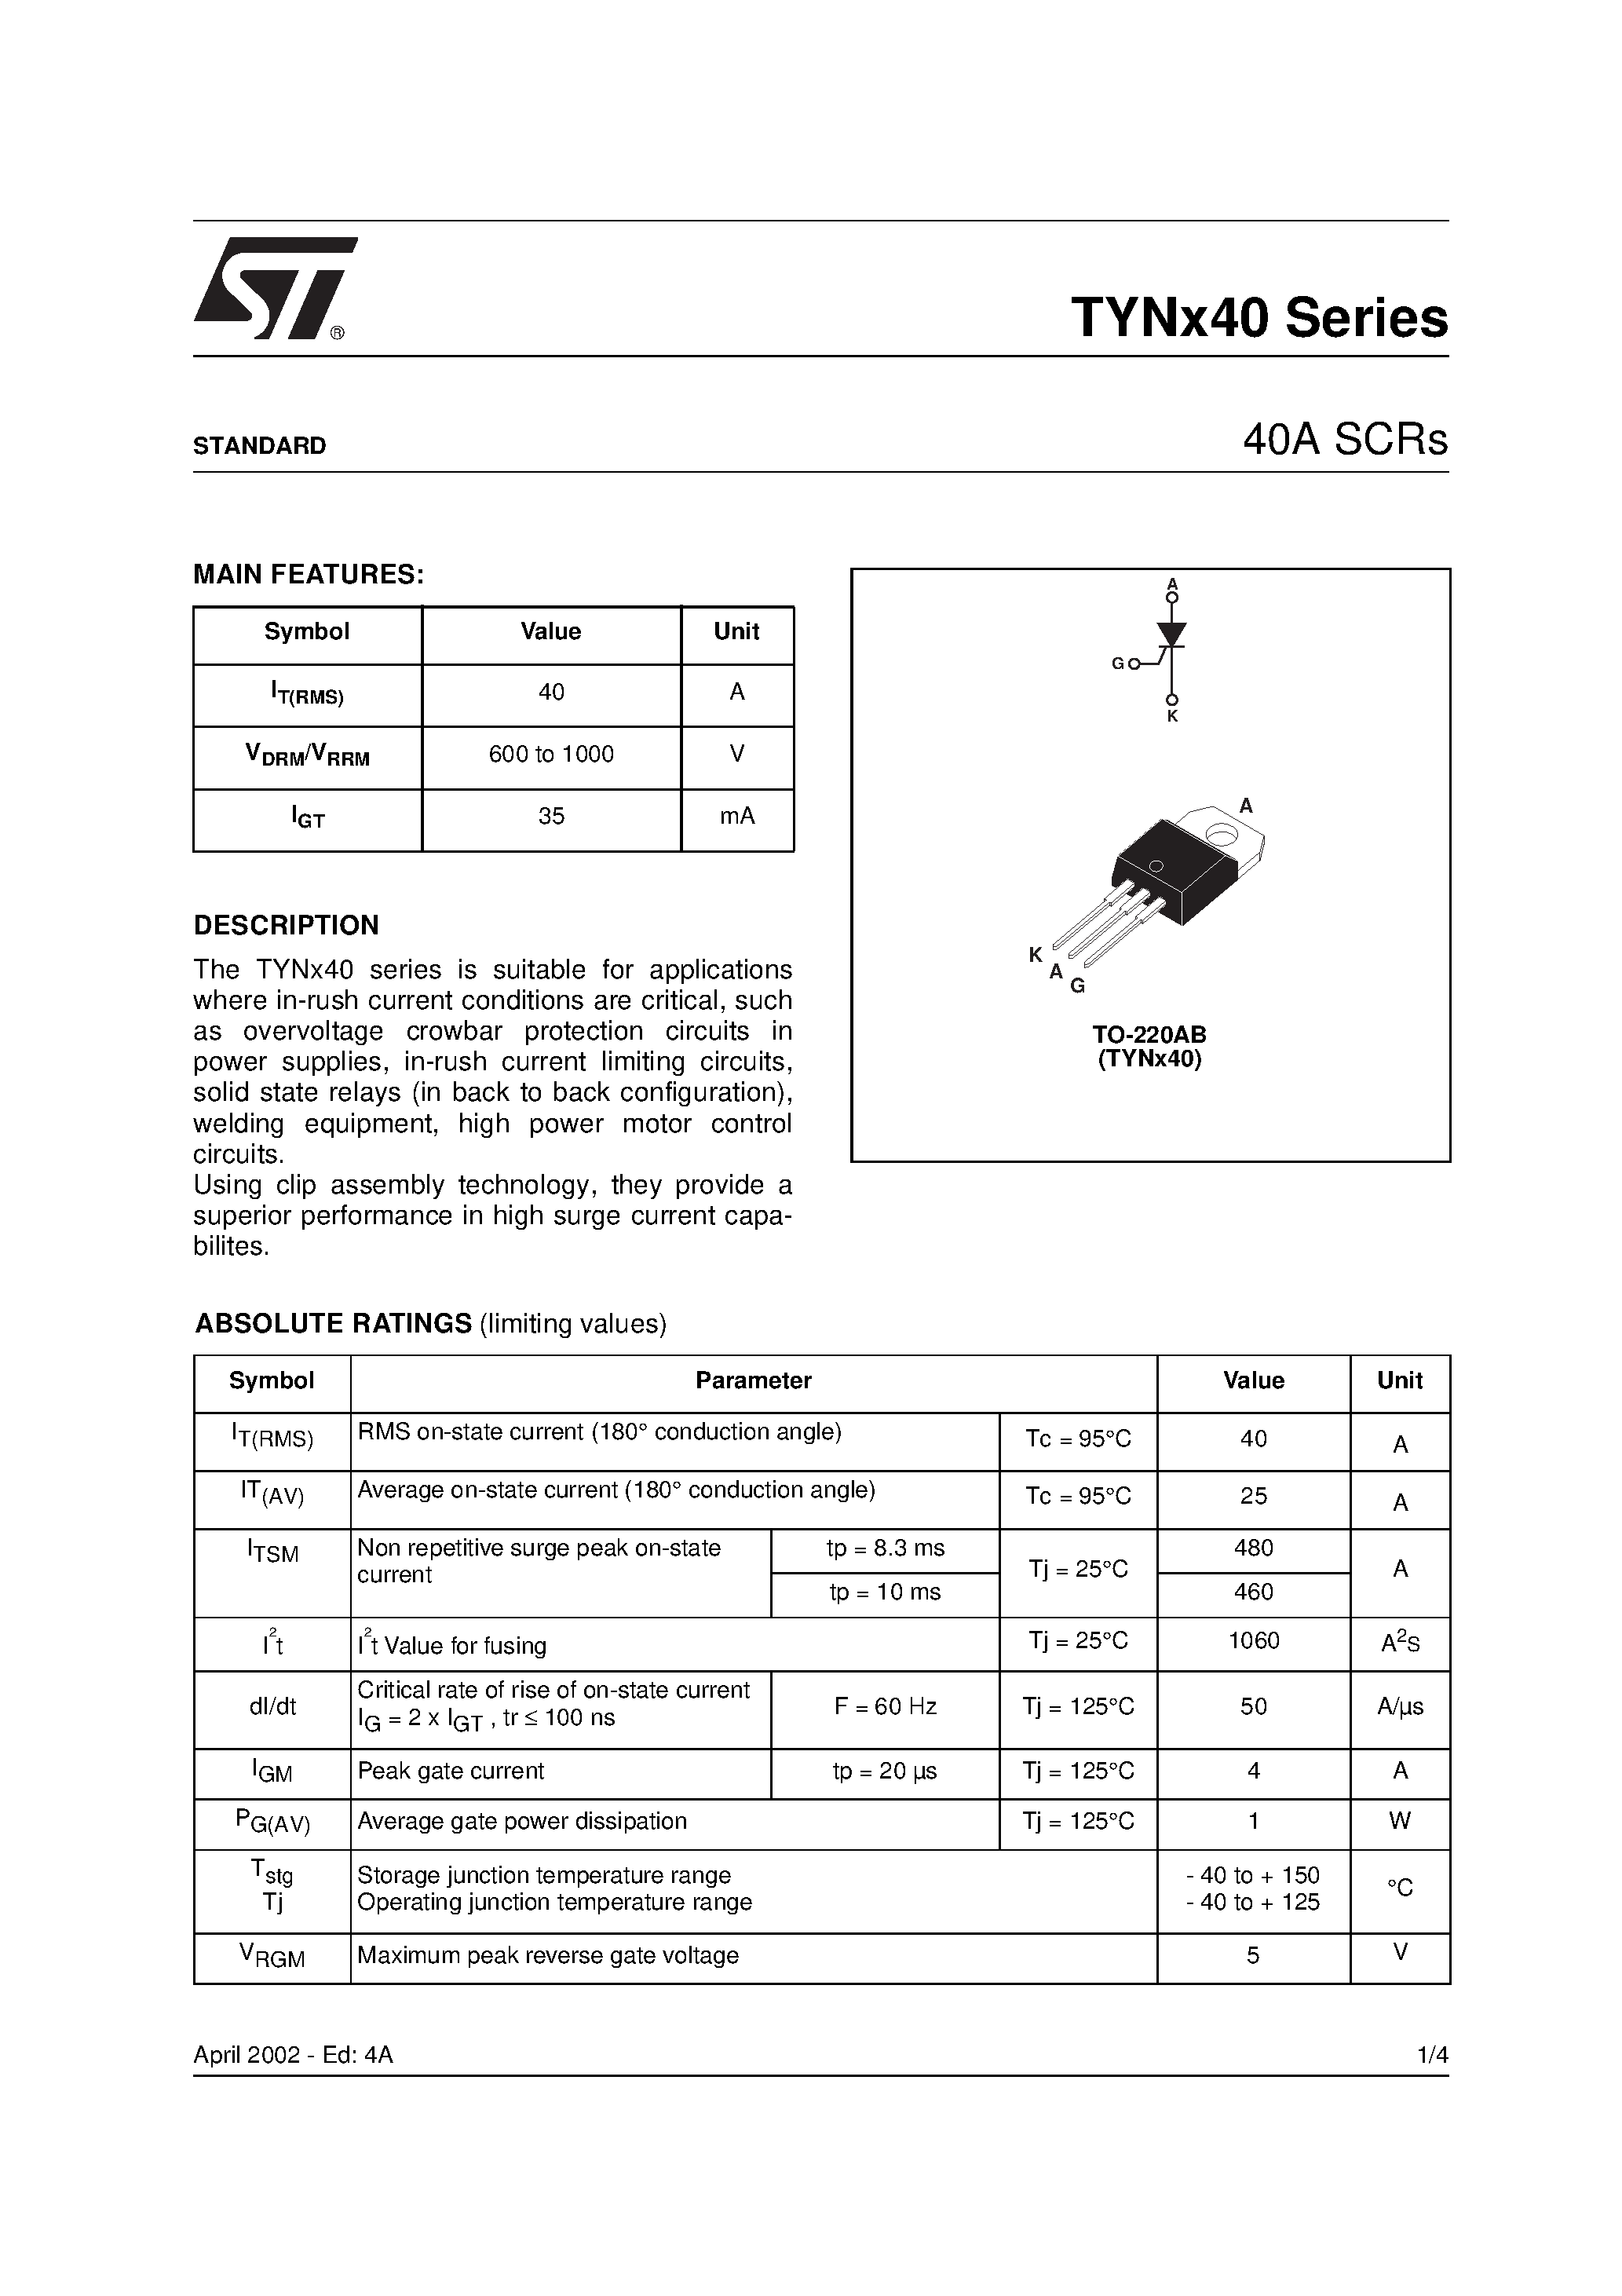 Datasheet TYNX40-1 - 40A SCRs page 1